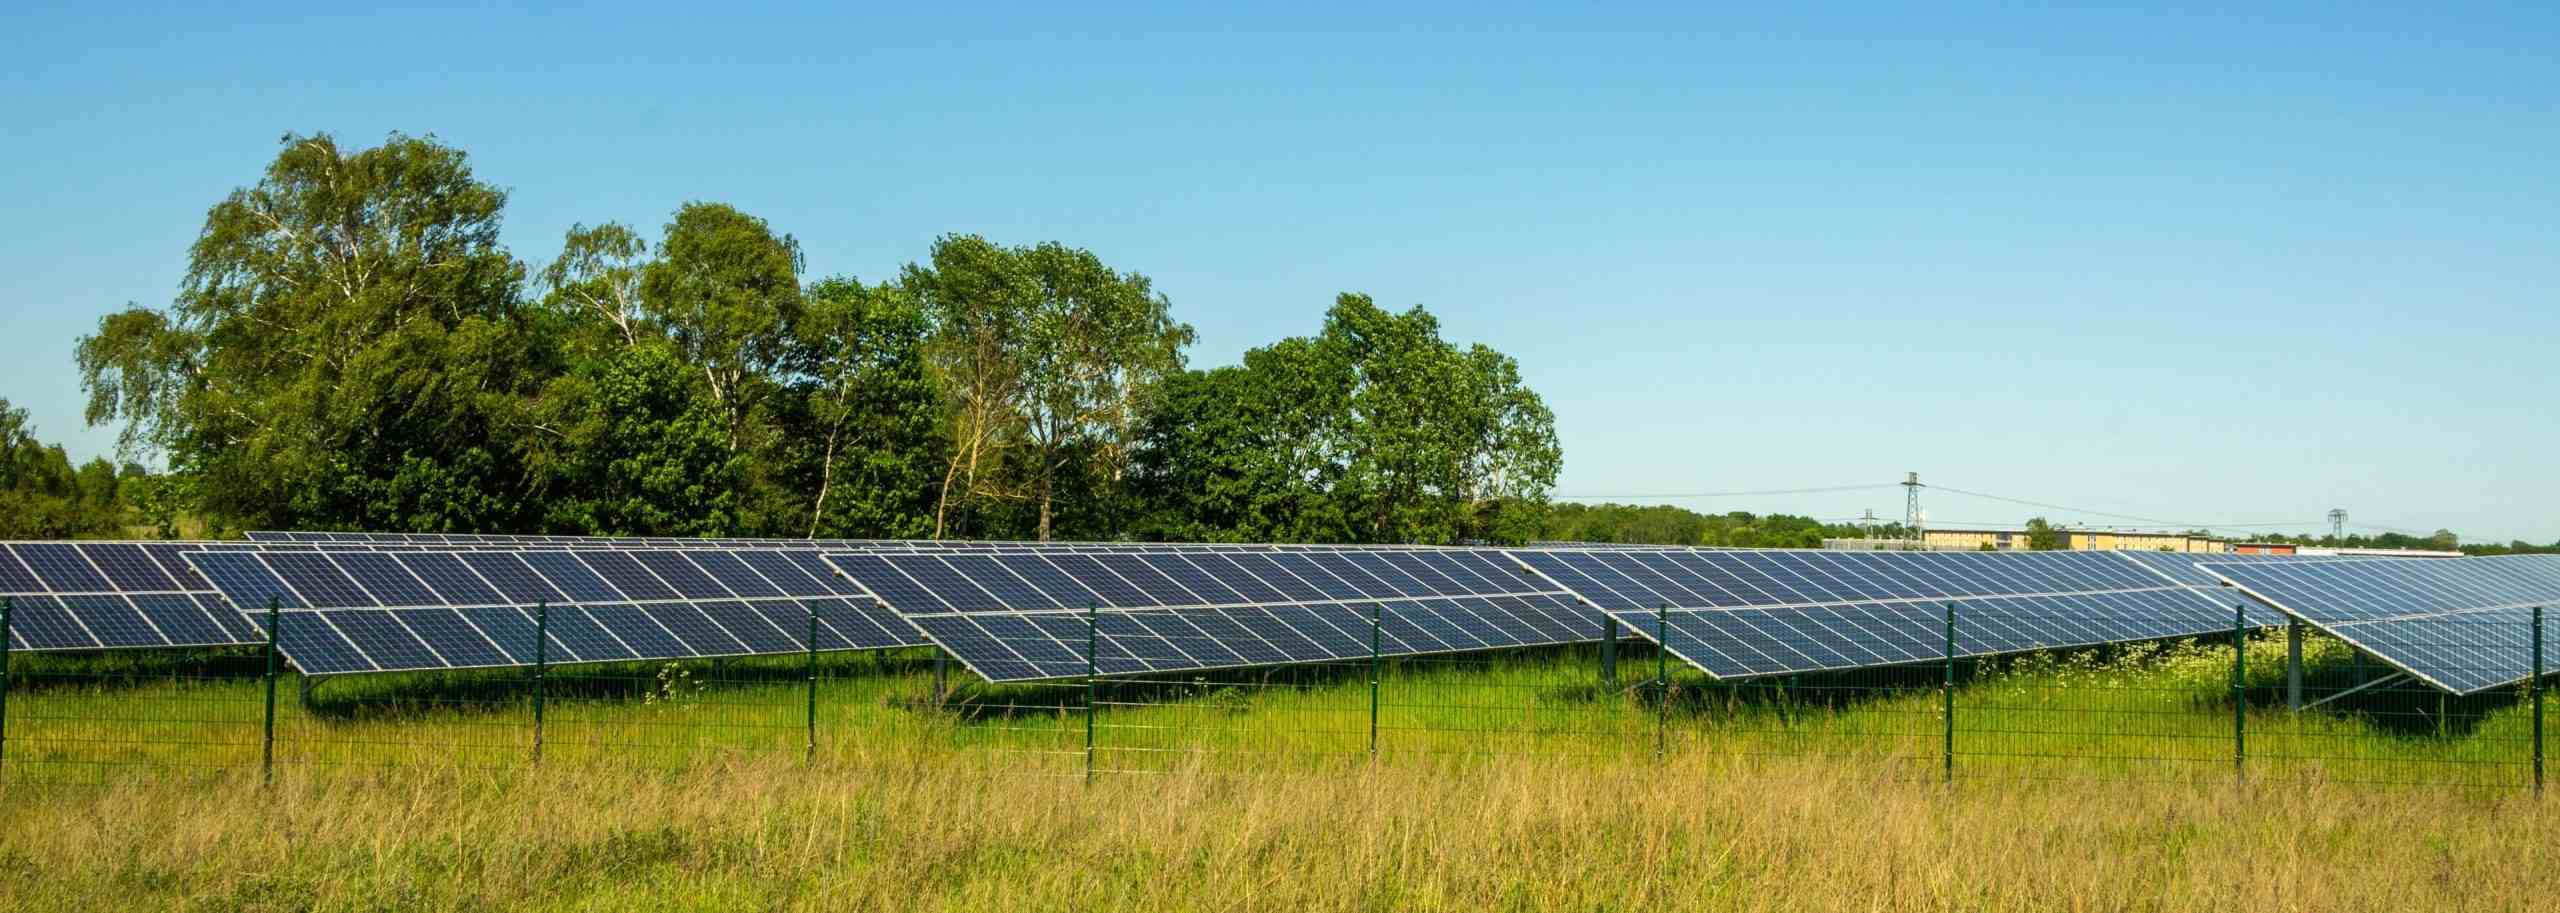 New Illinois community solar project will provide free power to low-to-moderate-income families